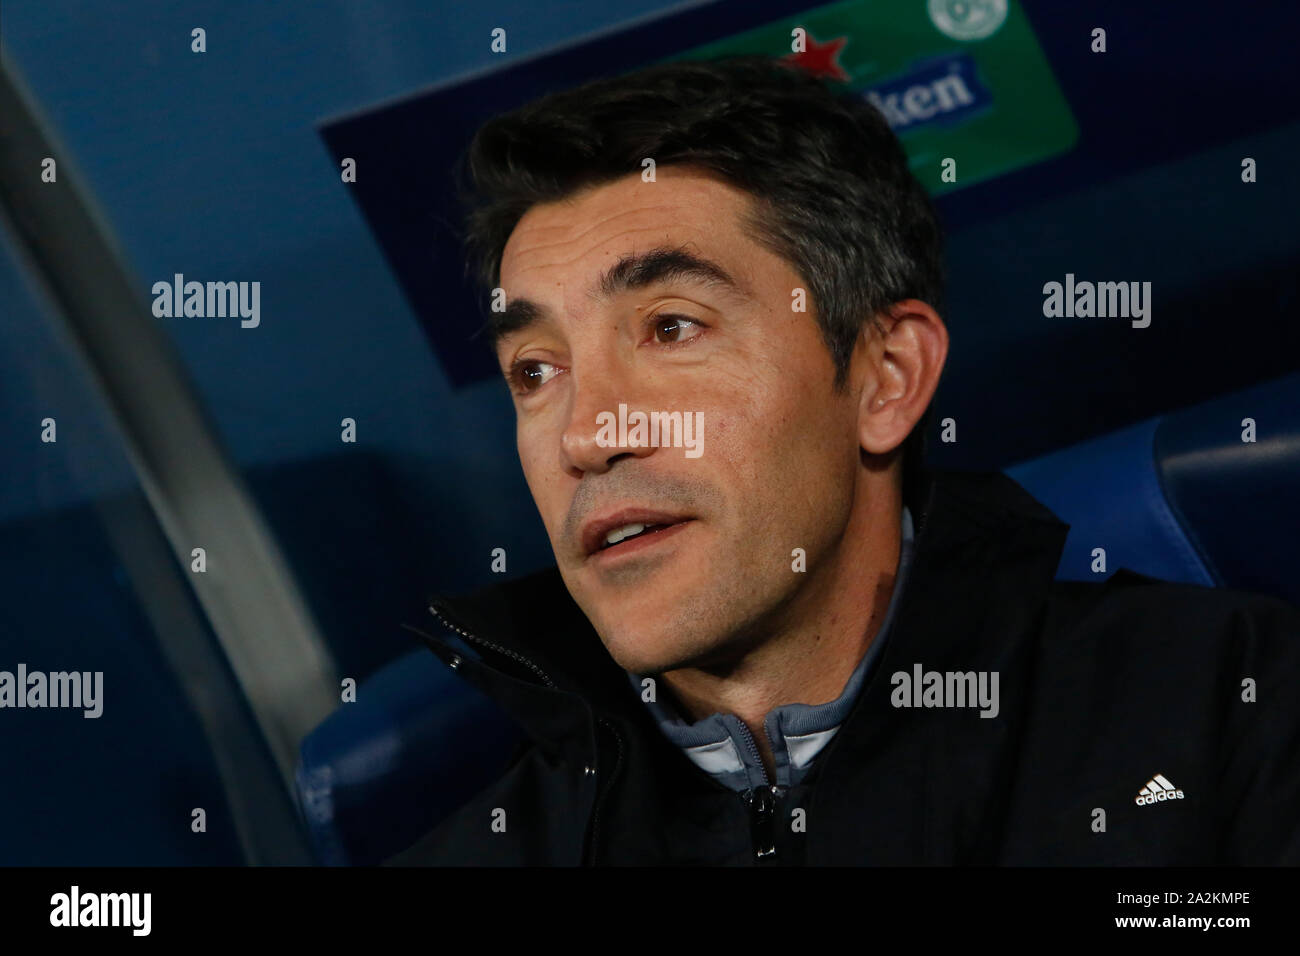 SAINT PETERSBURG, RUSSIA - OCTOBER 02: SL Benfica head coach Bruno Lage looks on during the UEFA Champions League group G match between Zenit St. Petersburg and SL Benfica at Gazprom Arena on October 2, 2019 in Saint Petersburg, Russia. (Photo by (MB Media)) Stock Photo